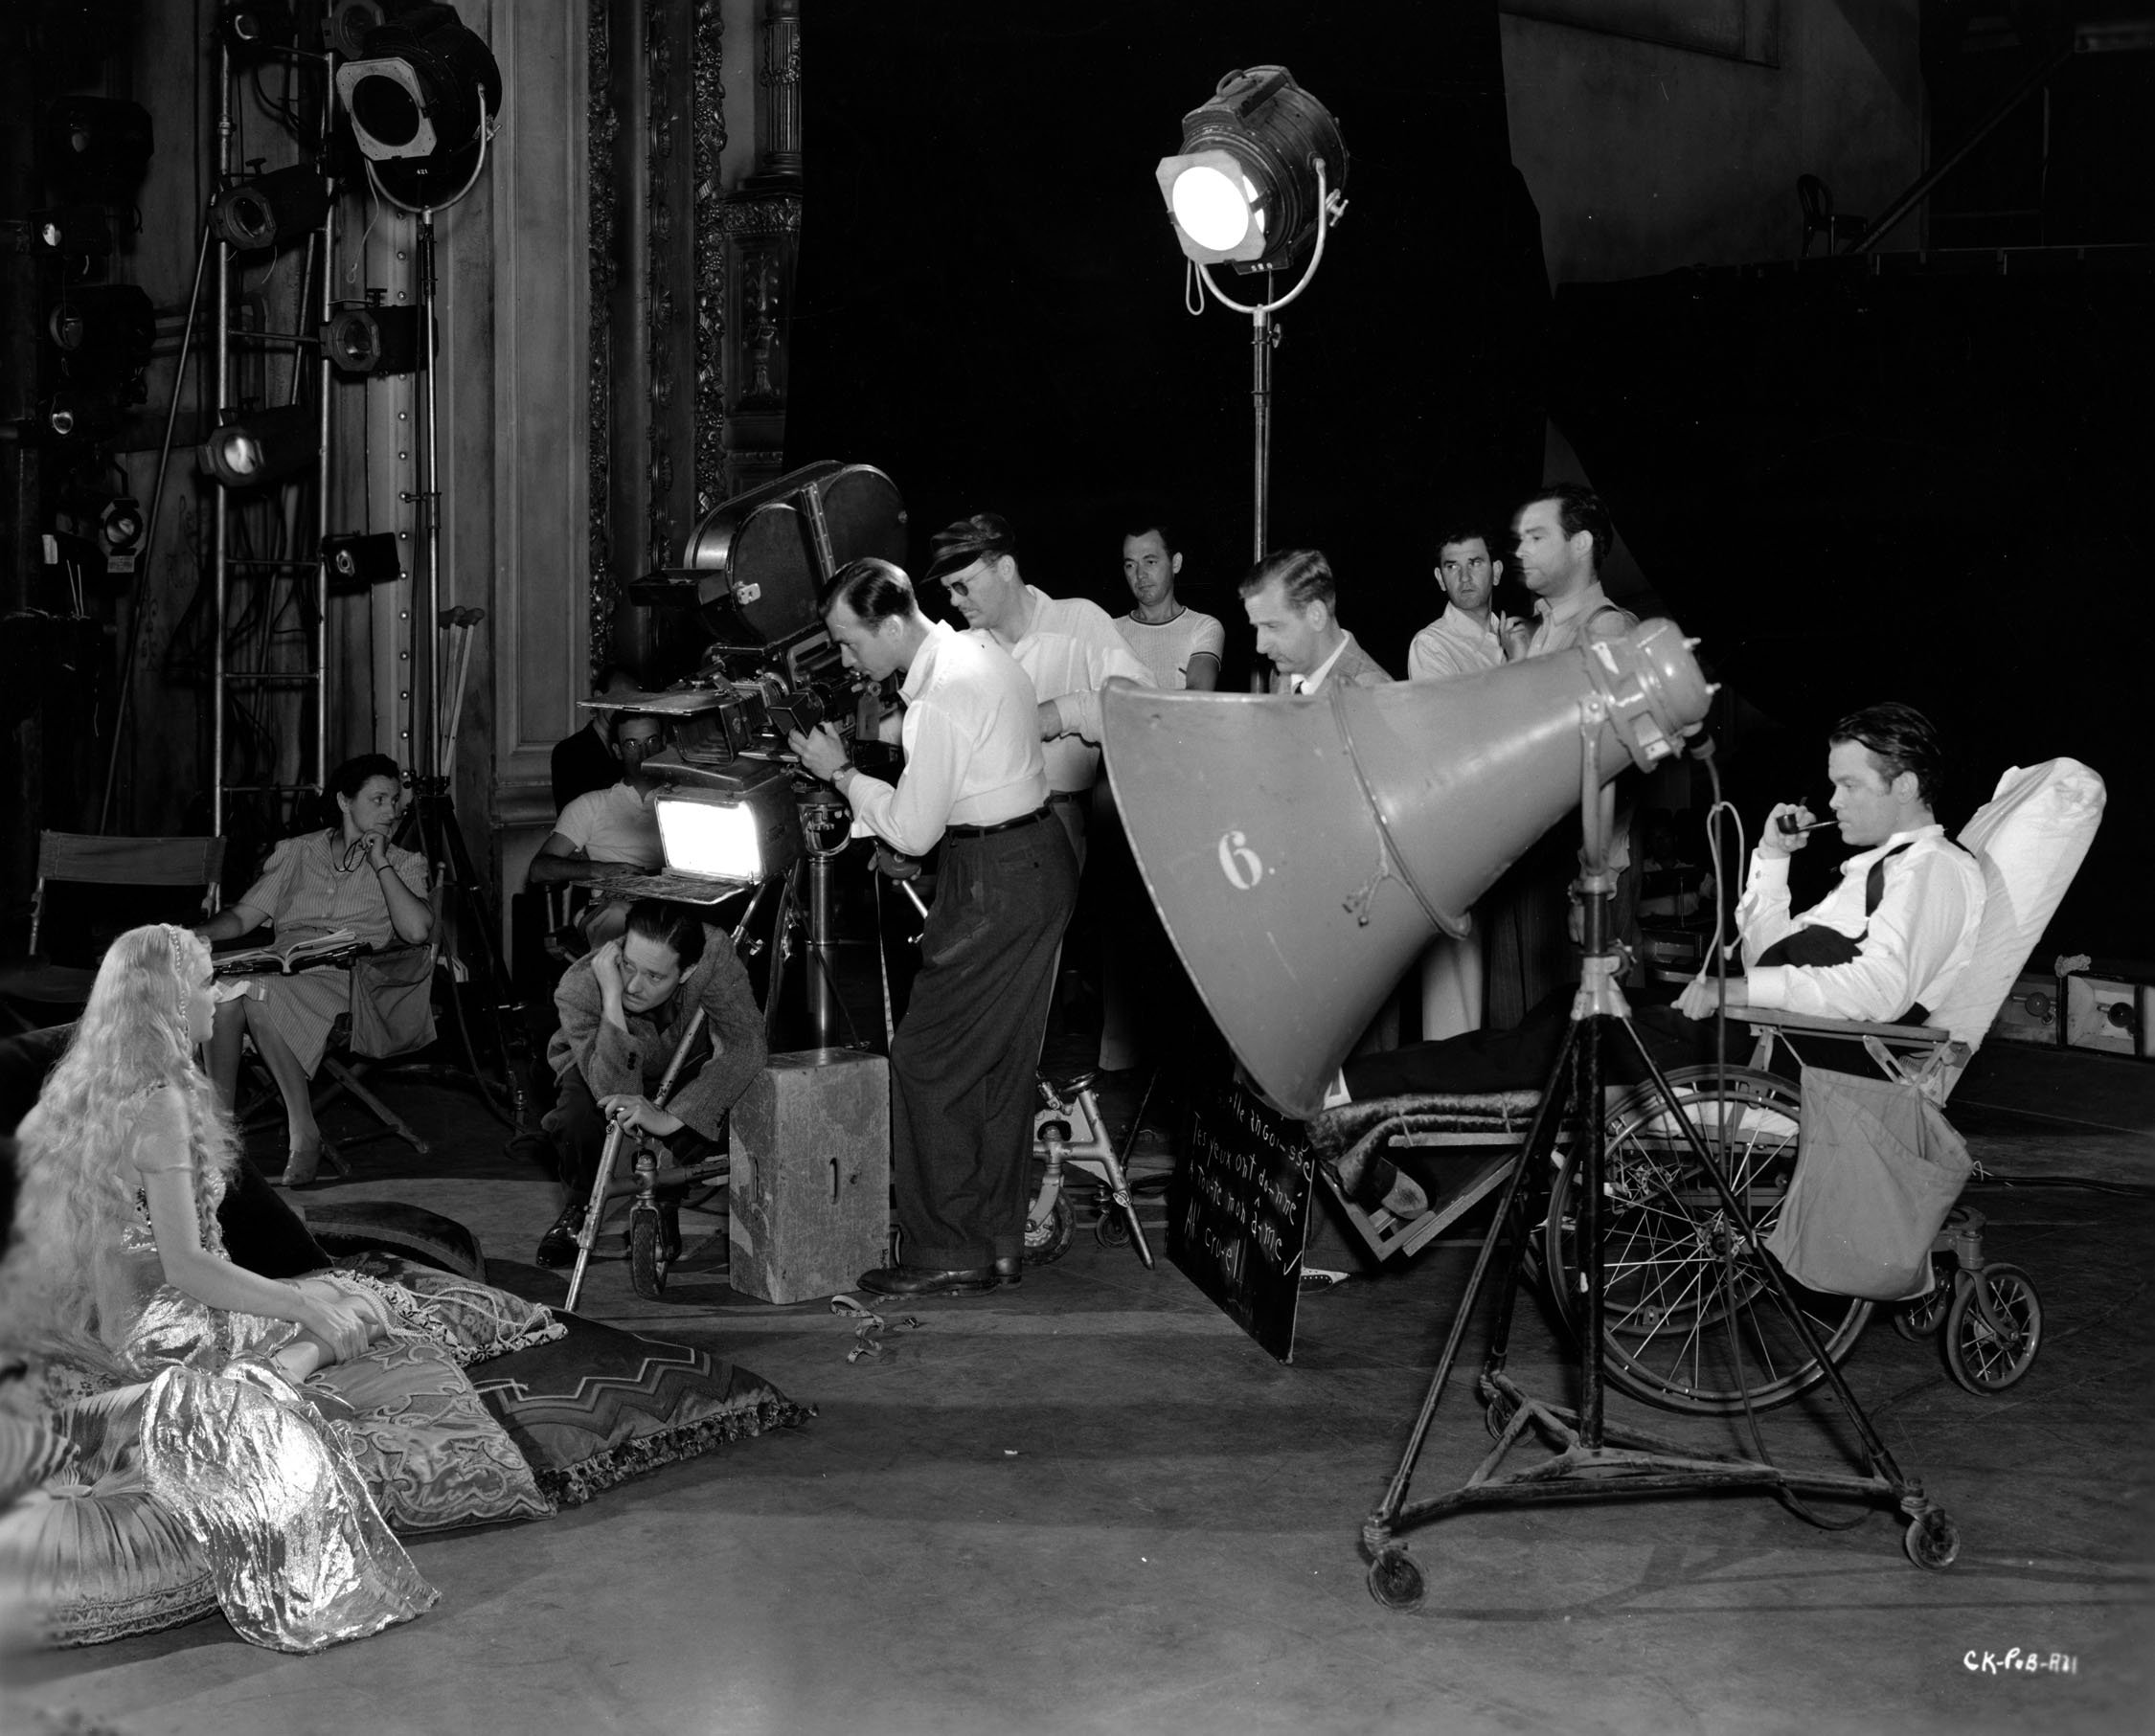 Production still. Original caption reads: "ORSON FILMS AN OPERA. Directing from a wheelchair while an injured ankle heals, Orson Welles, right, is shown here overseeing rehearsals of an opera scene for his initial RKO Radio production, “Citizen Kane.” Welles plays the title role in the picture, also produces and directs. Seated left is Dorothy Comingore, the young 'unknown' Welles chose for a leading role in the film. Crouched before the camera is Gregg Toland, director of photography, while the balance